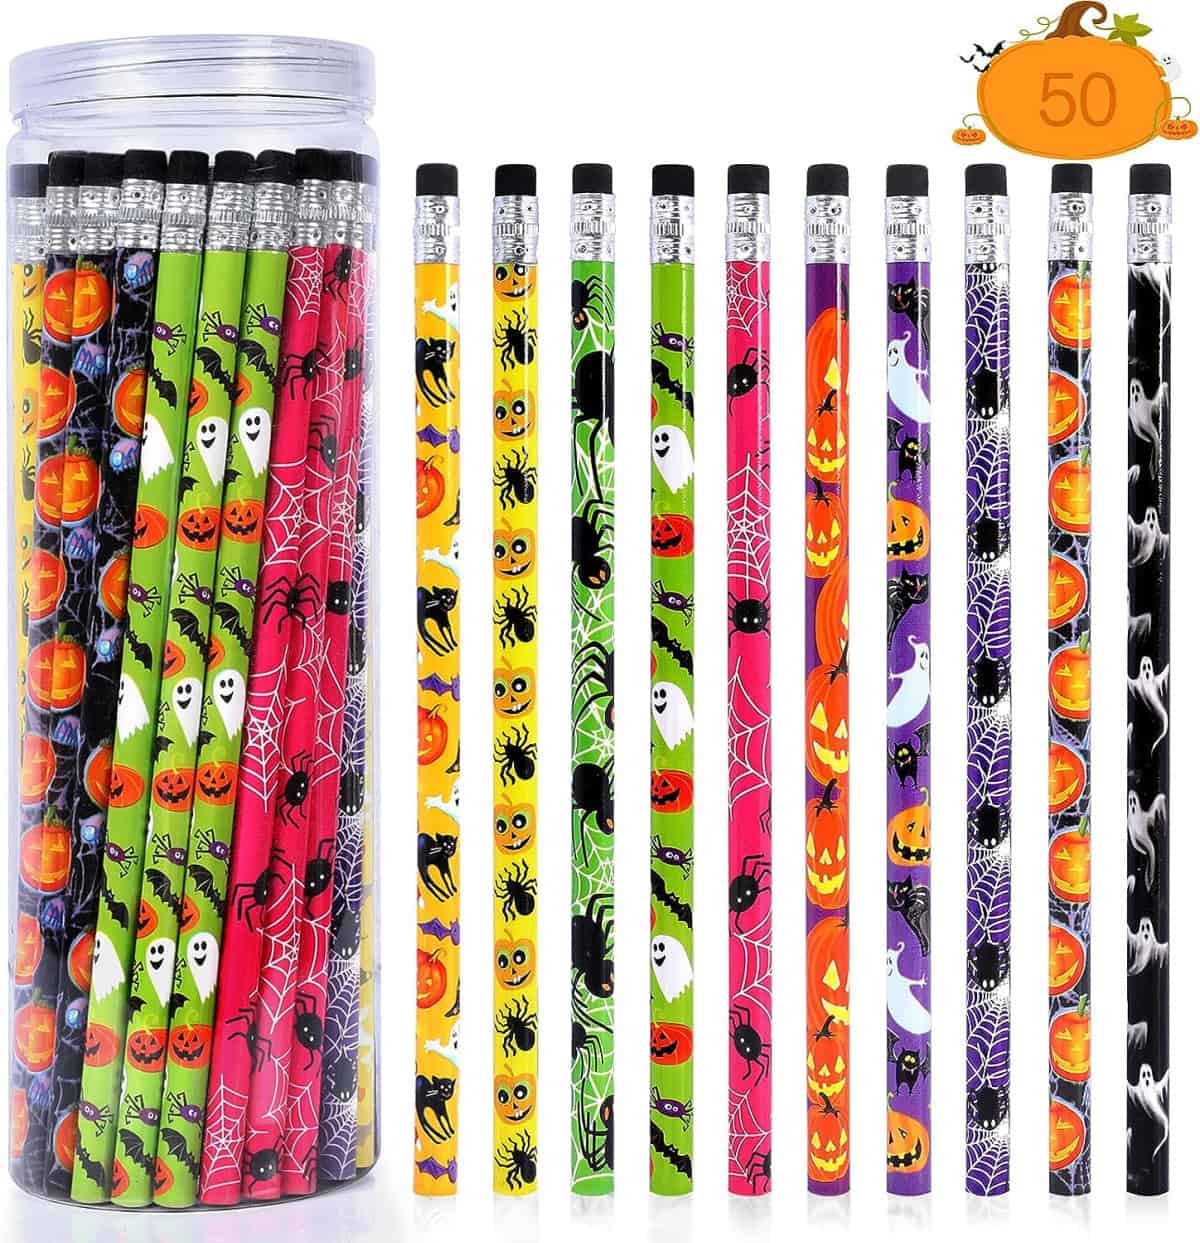 Fun Halloween Pencils for a witchy word search